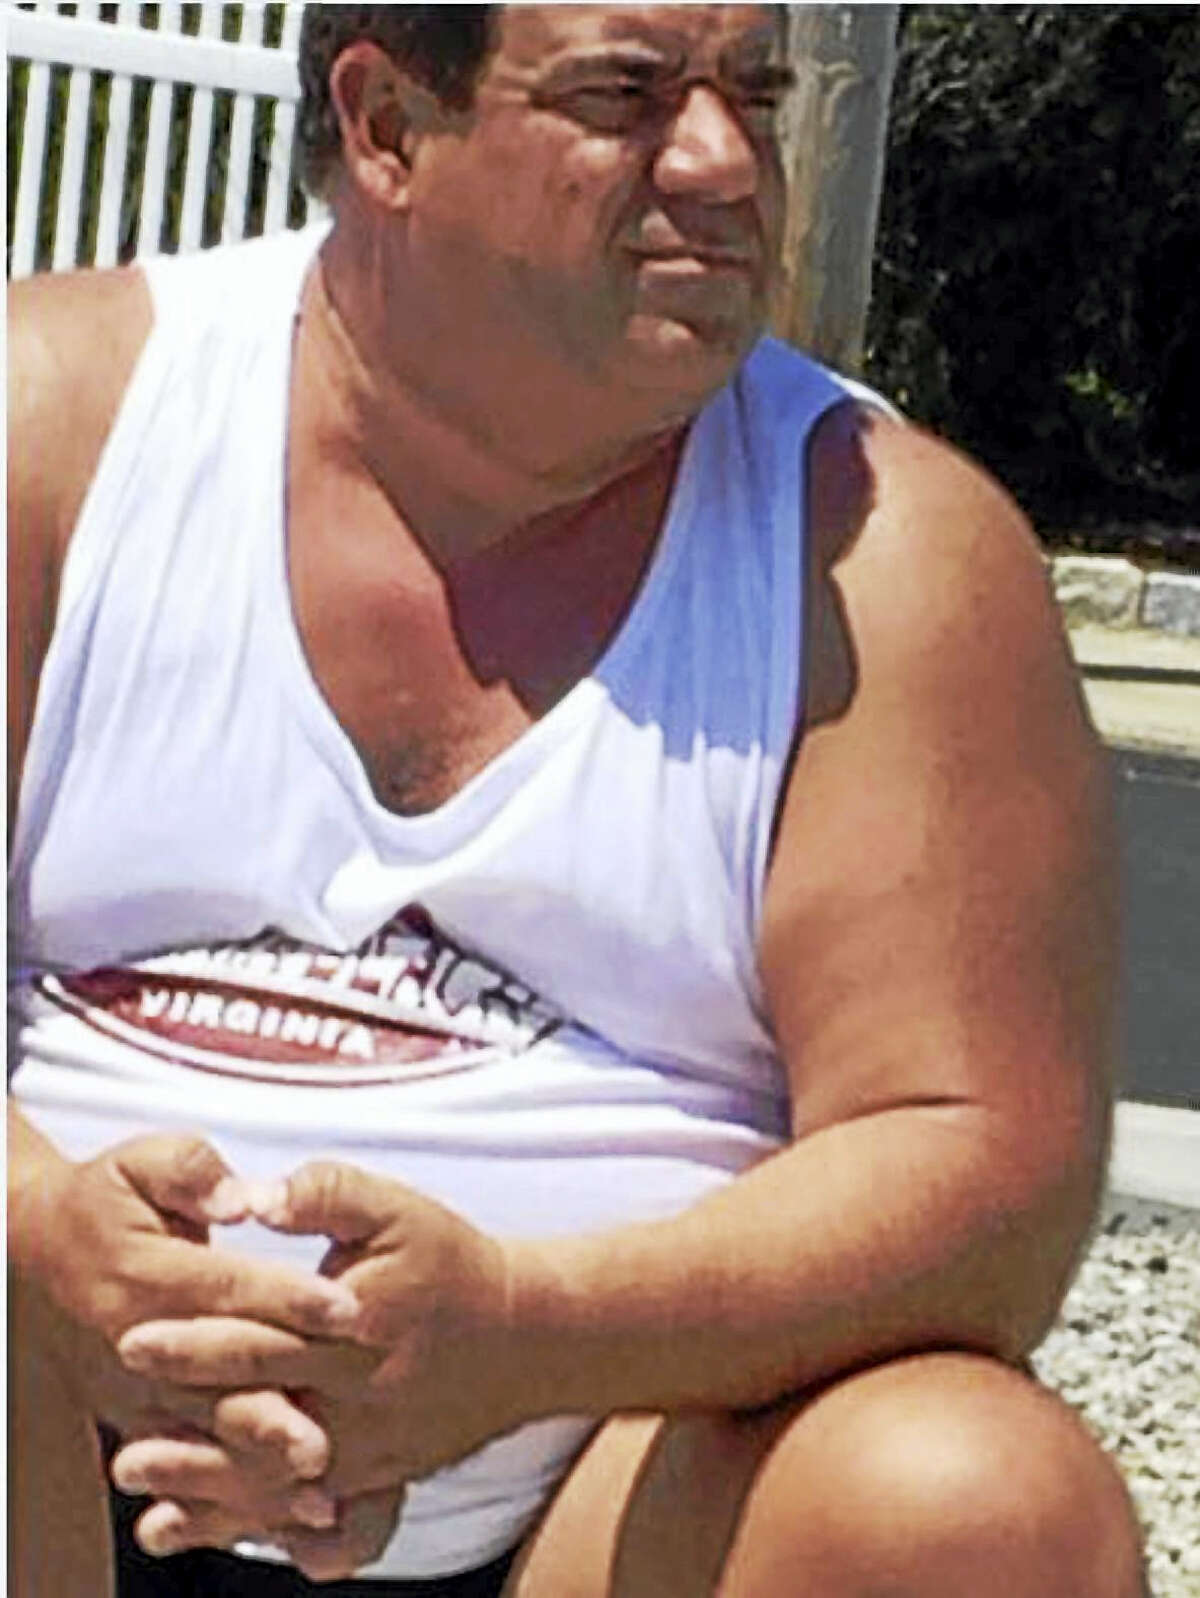 Courtesy Milford PDMilford police are looking for help identifying this man, who is accused of exposing himself at a local beach.